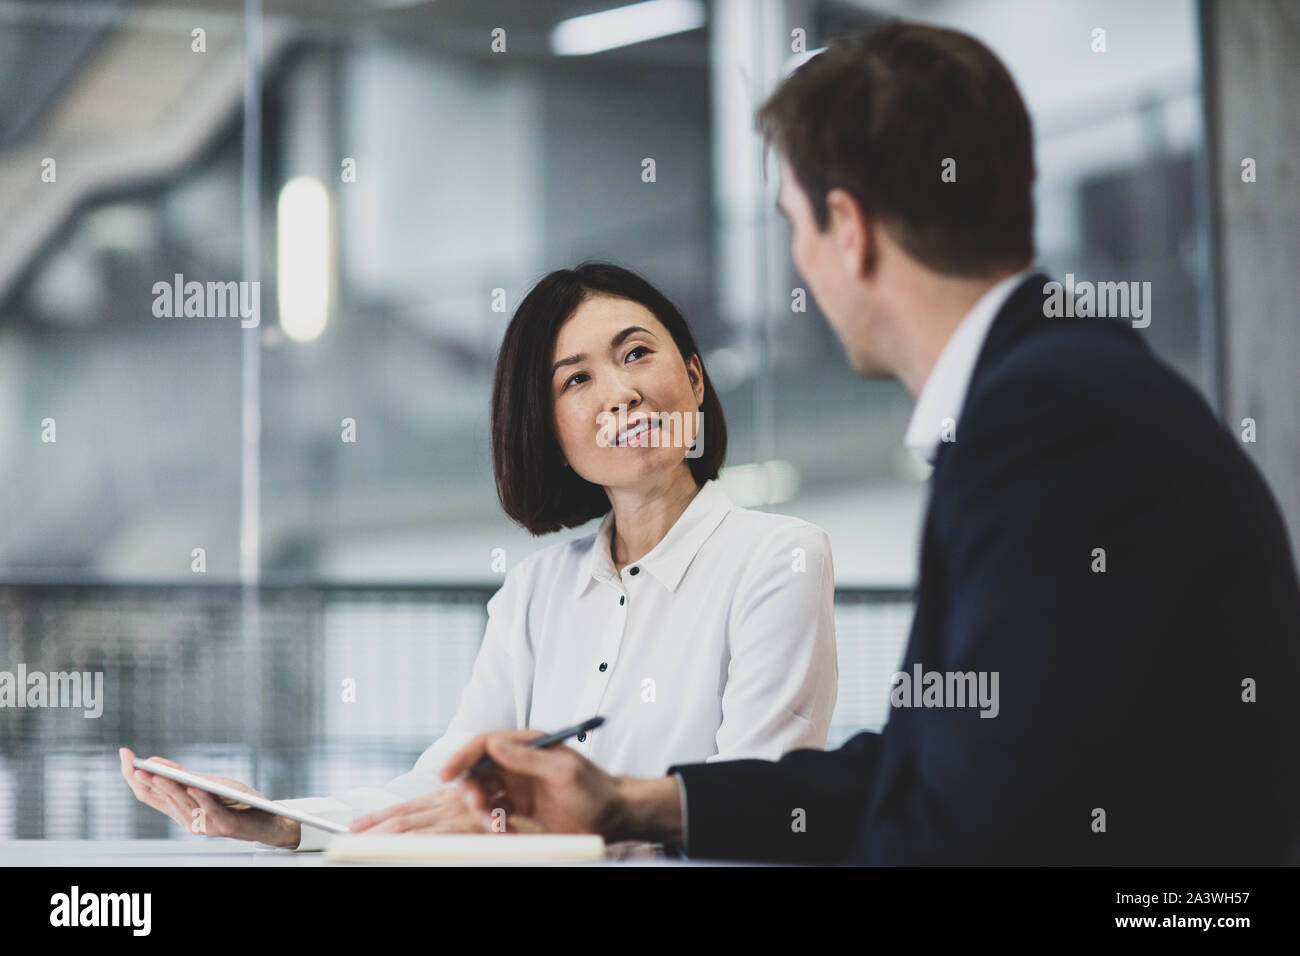 Business presentation in a corporate office Stock Photo